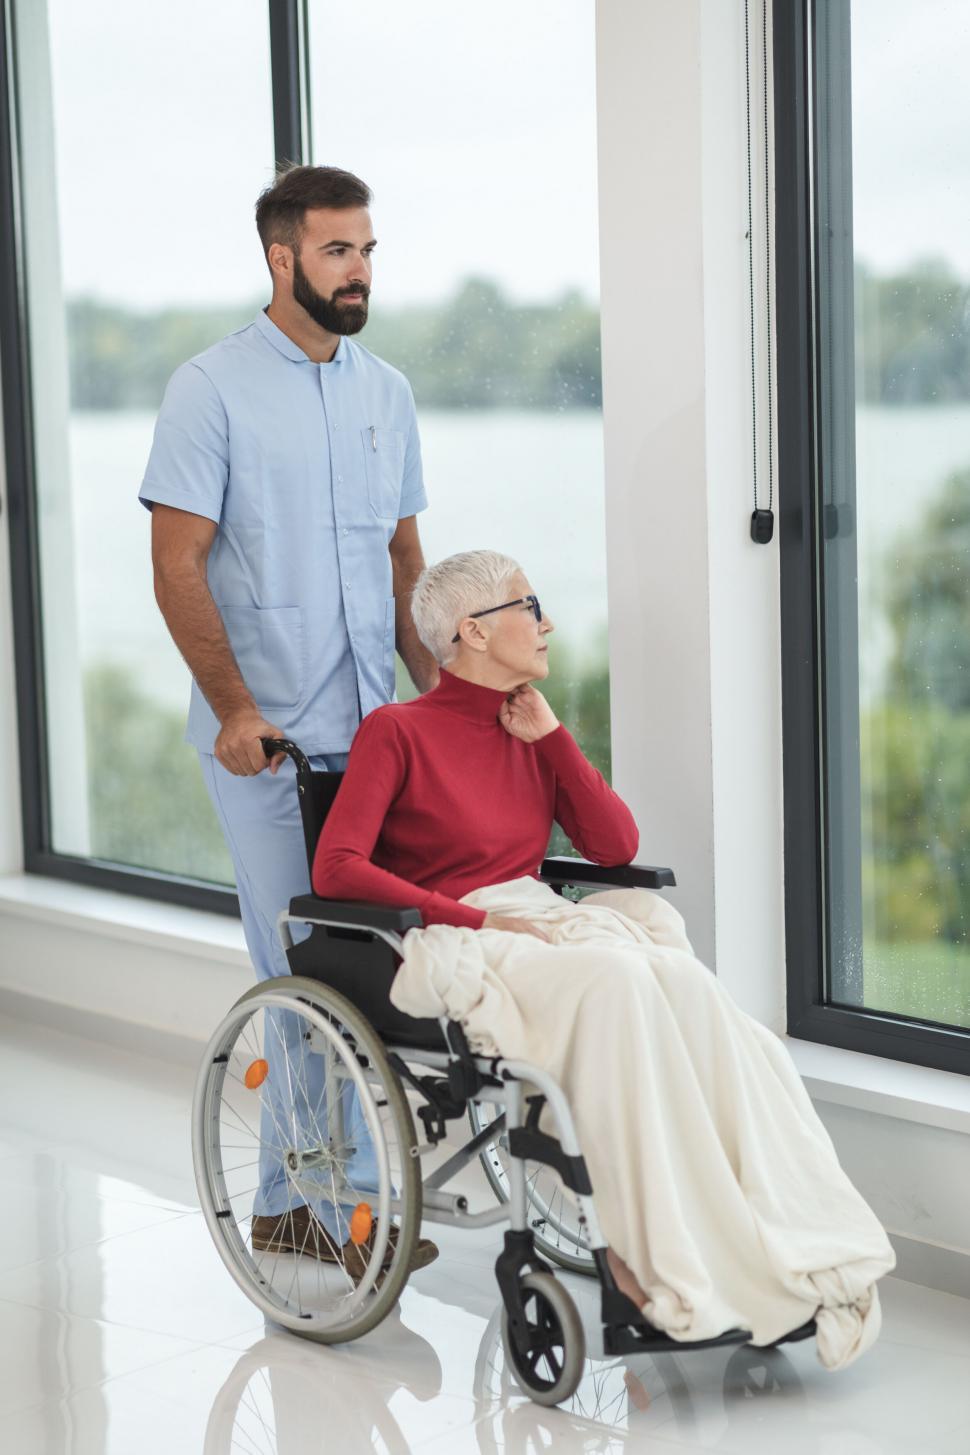 Free Image of Male nurse pushing a woman in a wheelchair 